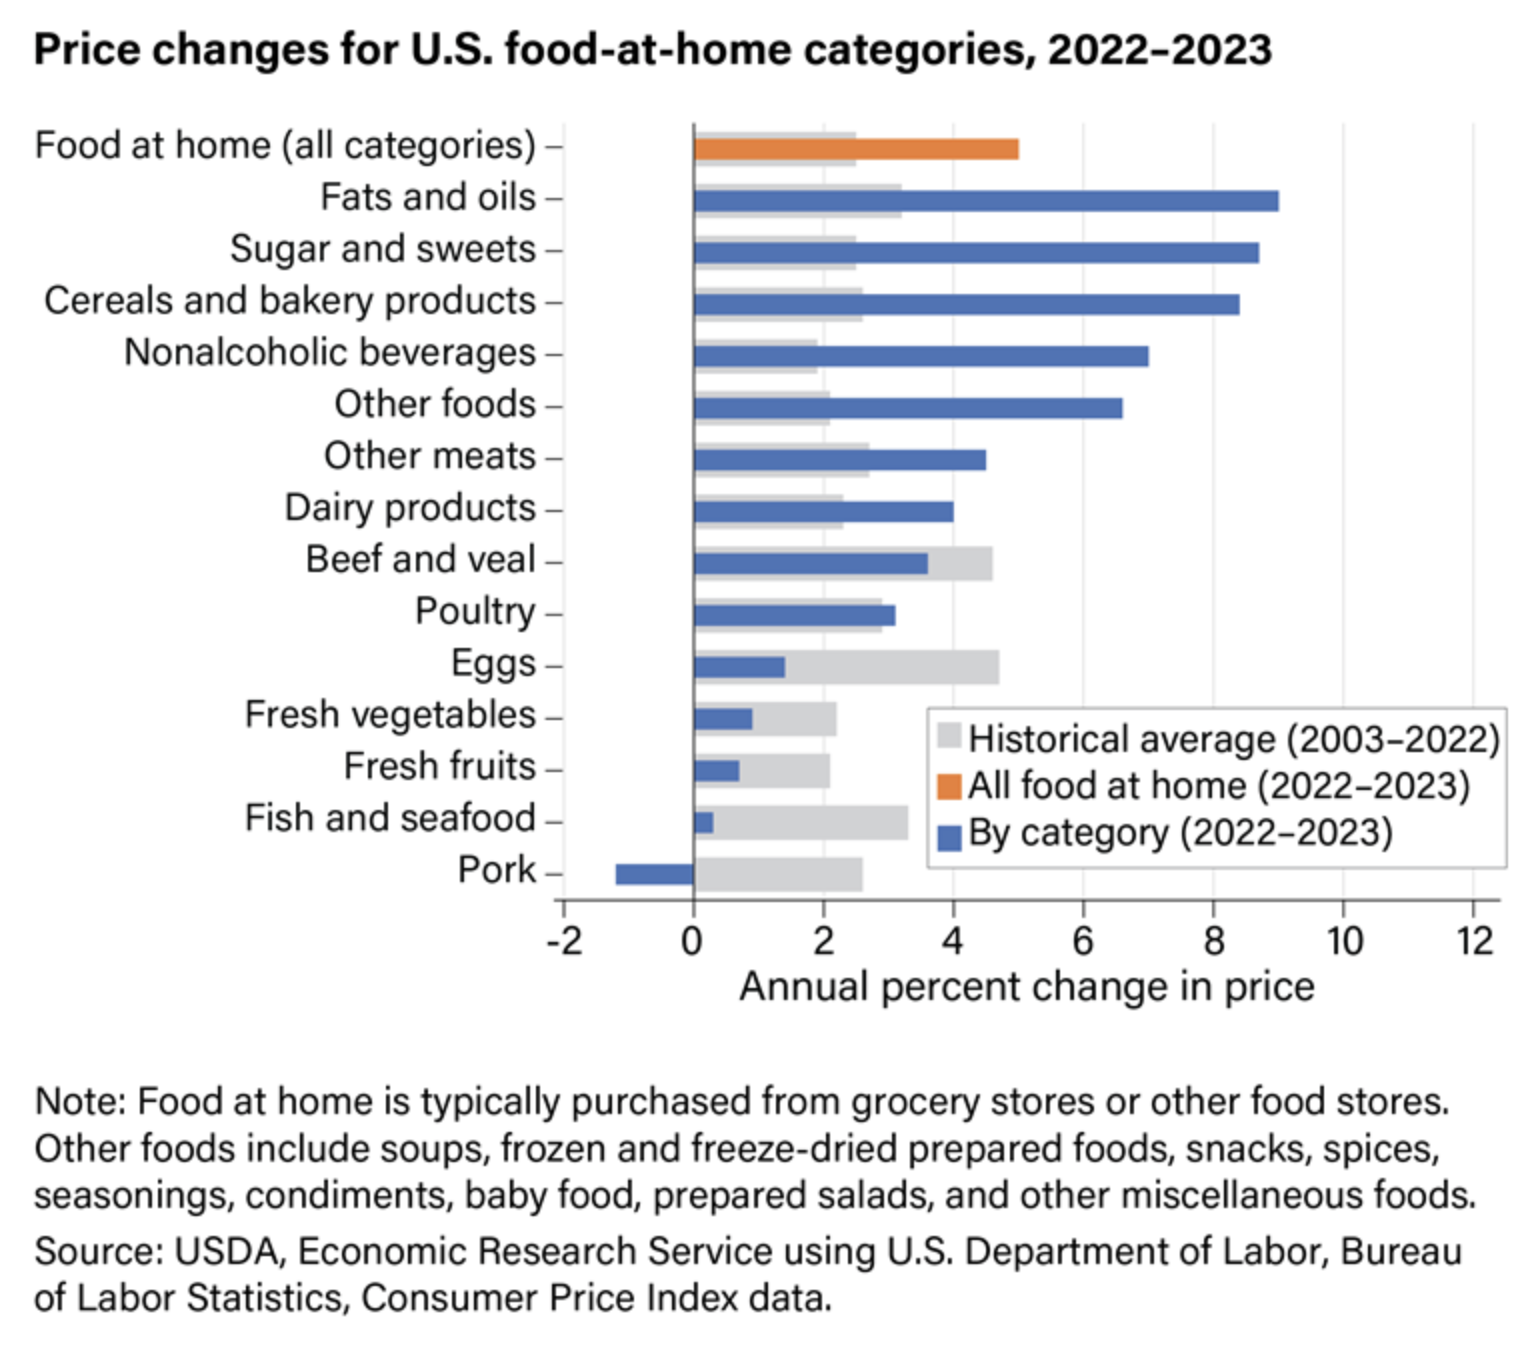 Price changes for U.S. food-at-home category 2022-2023